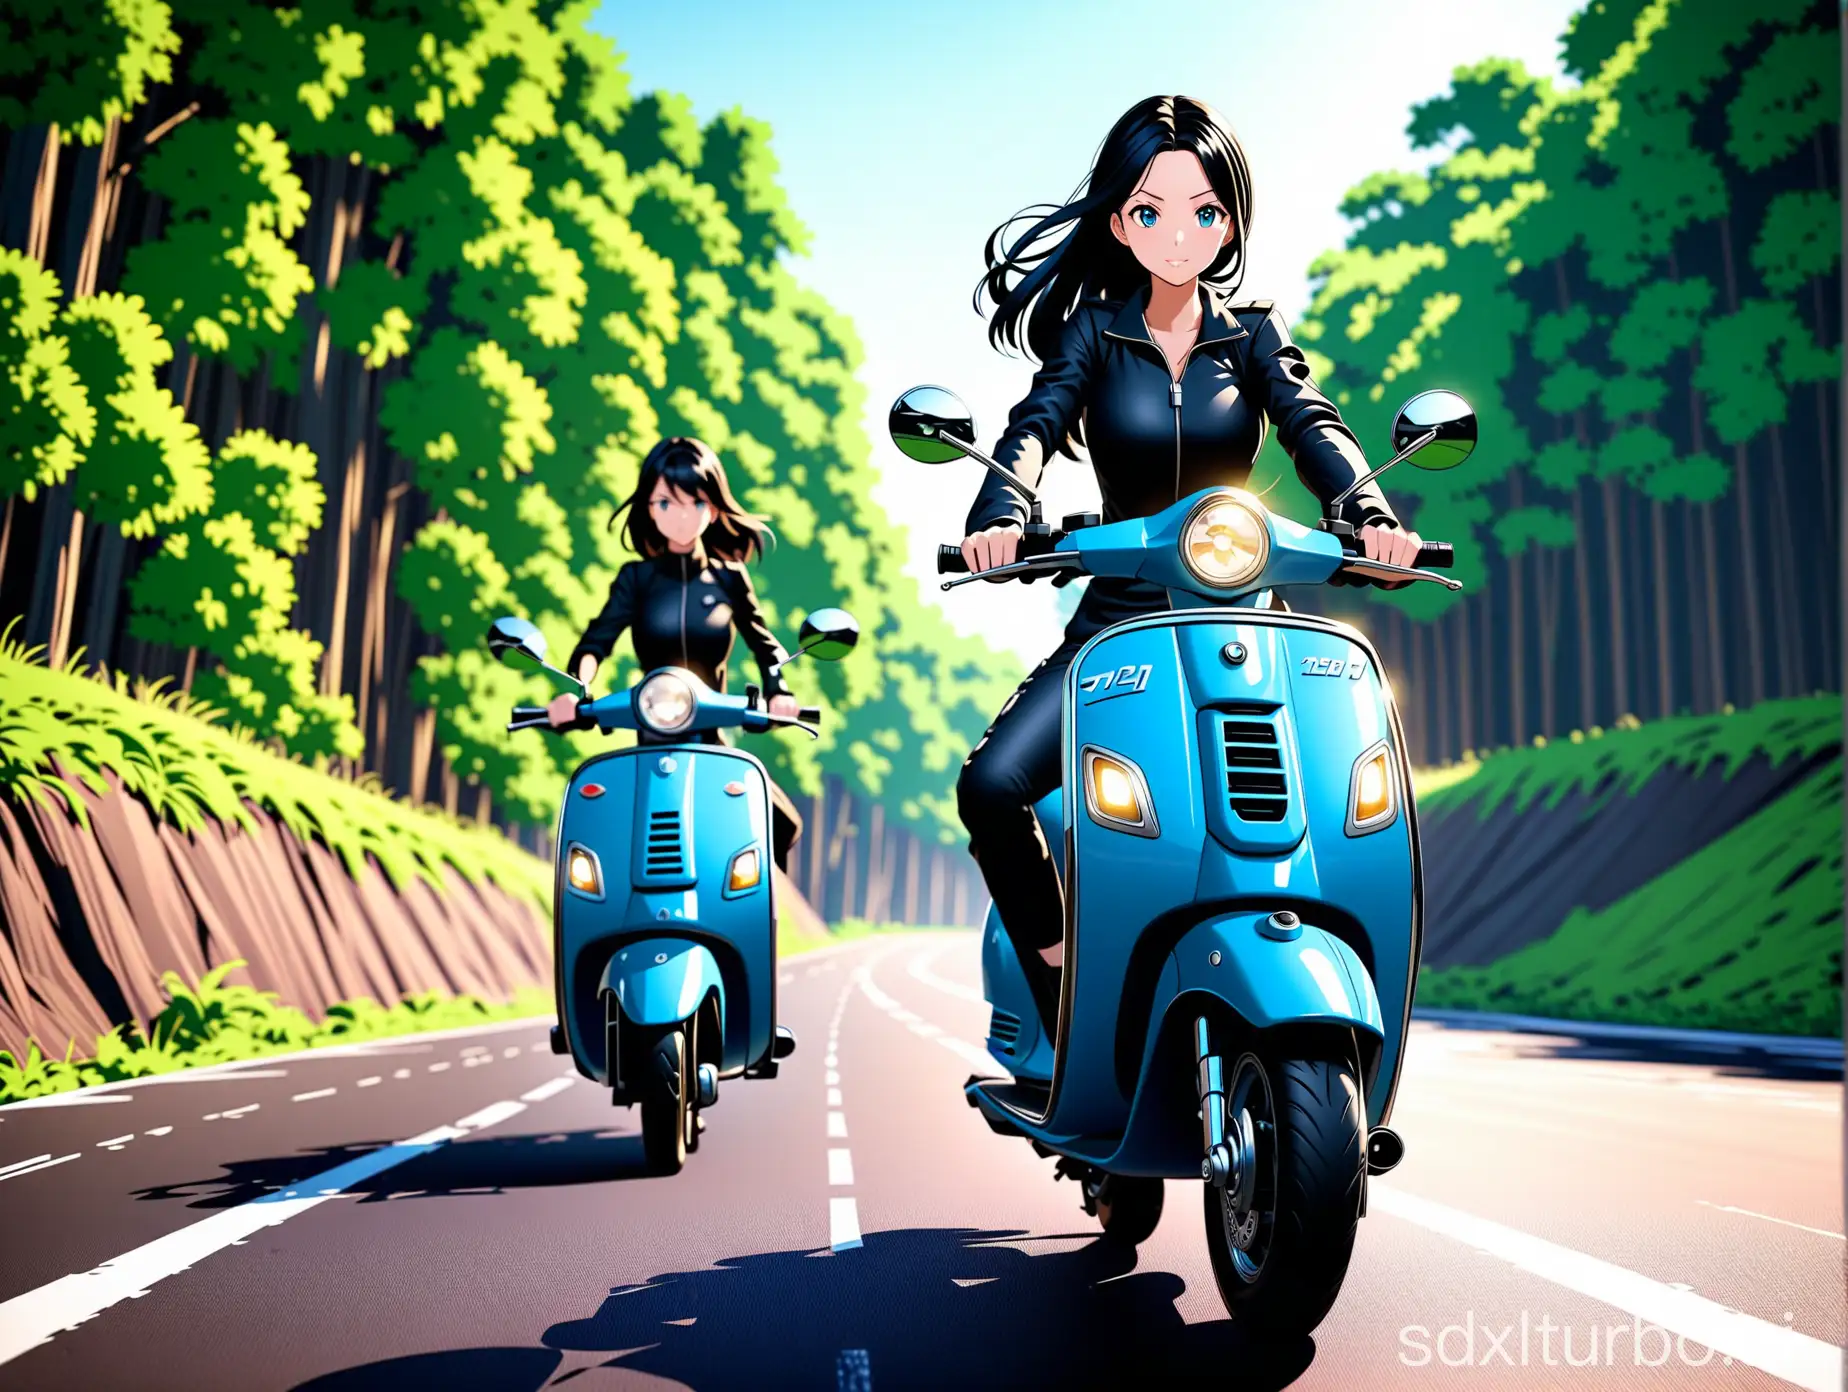 An amazing dynamic 3D photorealistic cartoon of a 21 year old Caucasian woman riding a black vespa scooter, she has long parted black hair and blue eyes, a Southern Cassowary is racing against her as they venture down the road, we see their determined faces in deep focus, gel lighting, complex, spectral rendering, inspired by Hiroaki Samura,  visually rich, Australia, stunning, 999 centillion resolution, 9999k, accurate color grading, sub-pixel detail, highest quality, Octane 10 render, seamless transitions, HDR, ray traced, bump mapping, depth of field, ARRI ALEXA Mini LF, ARRI Signature Prime 99999999999999999999999999999999999999999999999999999999999999999999999999999999999999999999999999999999999999999999999999999999999999999999999999999999999999999999999999999999999999999999999999999999999999999999999999999999999999999999999999999999999999999999999999999999999999999999999999999999999999999999999999999999999999999999999999999999999999mm, f/1.8-2L, ar 4:3, illustration, cinematic, 3d render, painting, anime